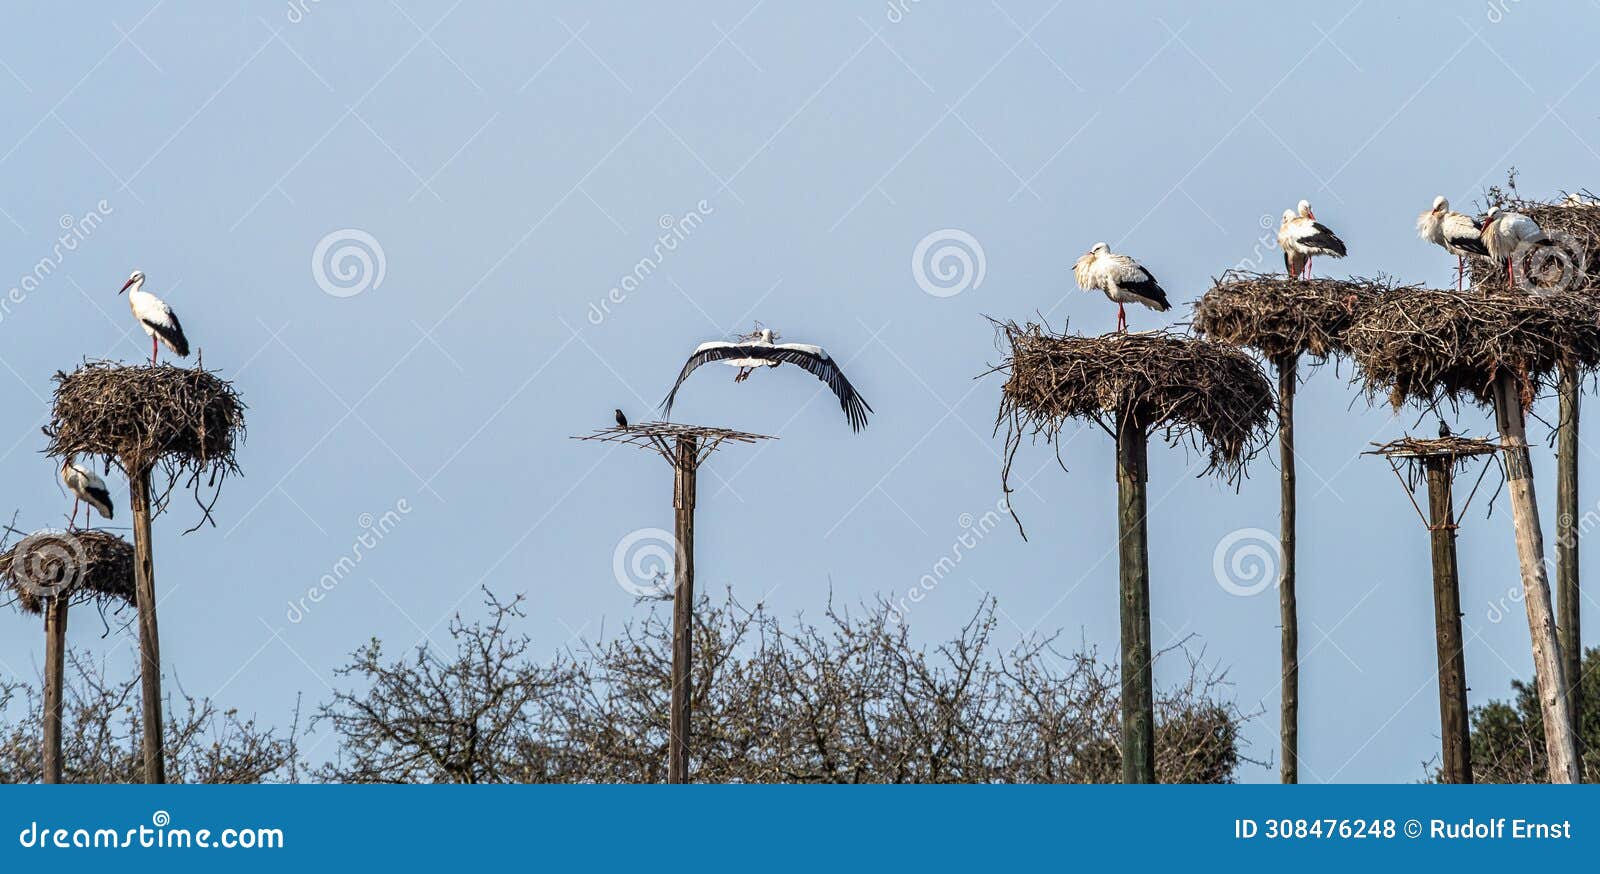 storks colony in a protected area at los barruecos natural monument, malpartida de caceres, extremadura, spain